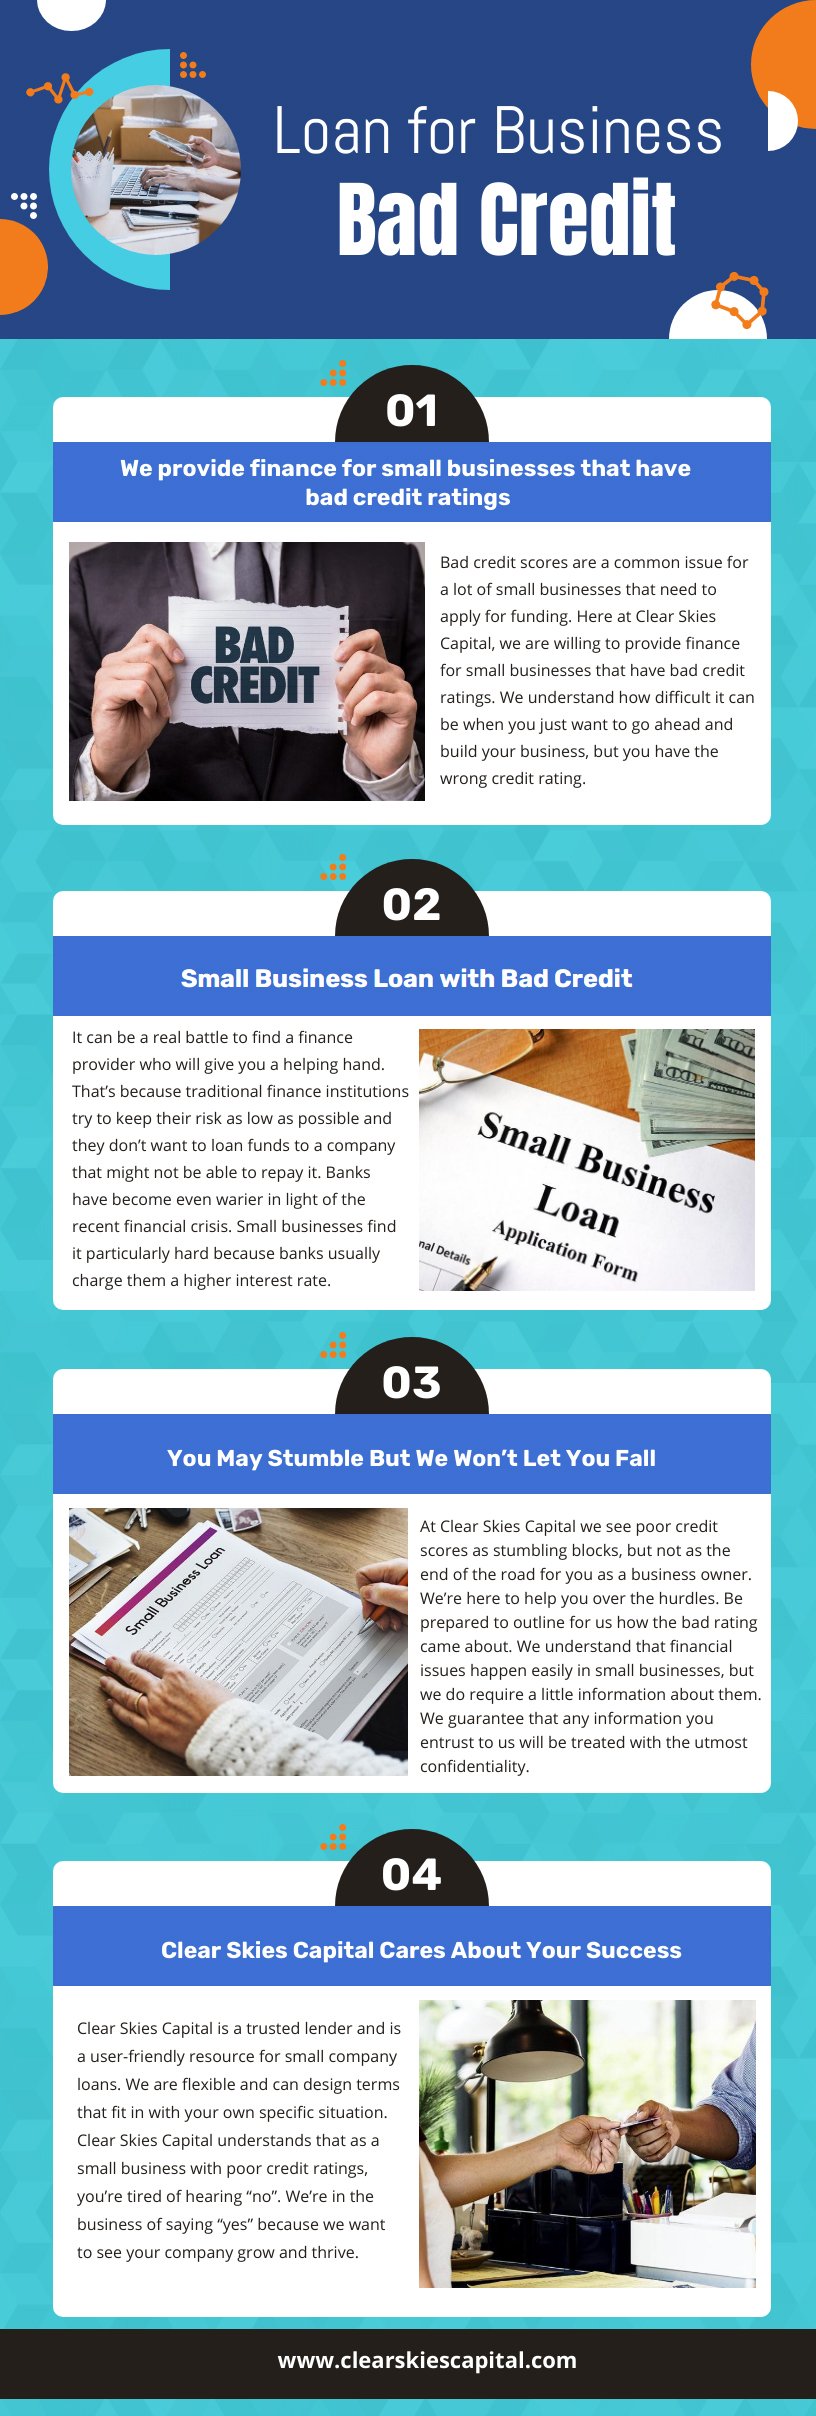 Loan For Business Bad Credit